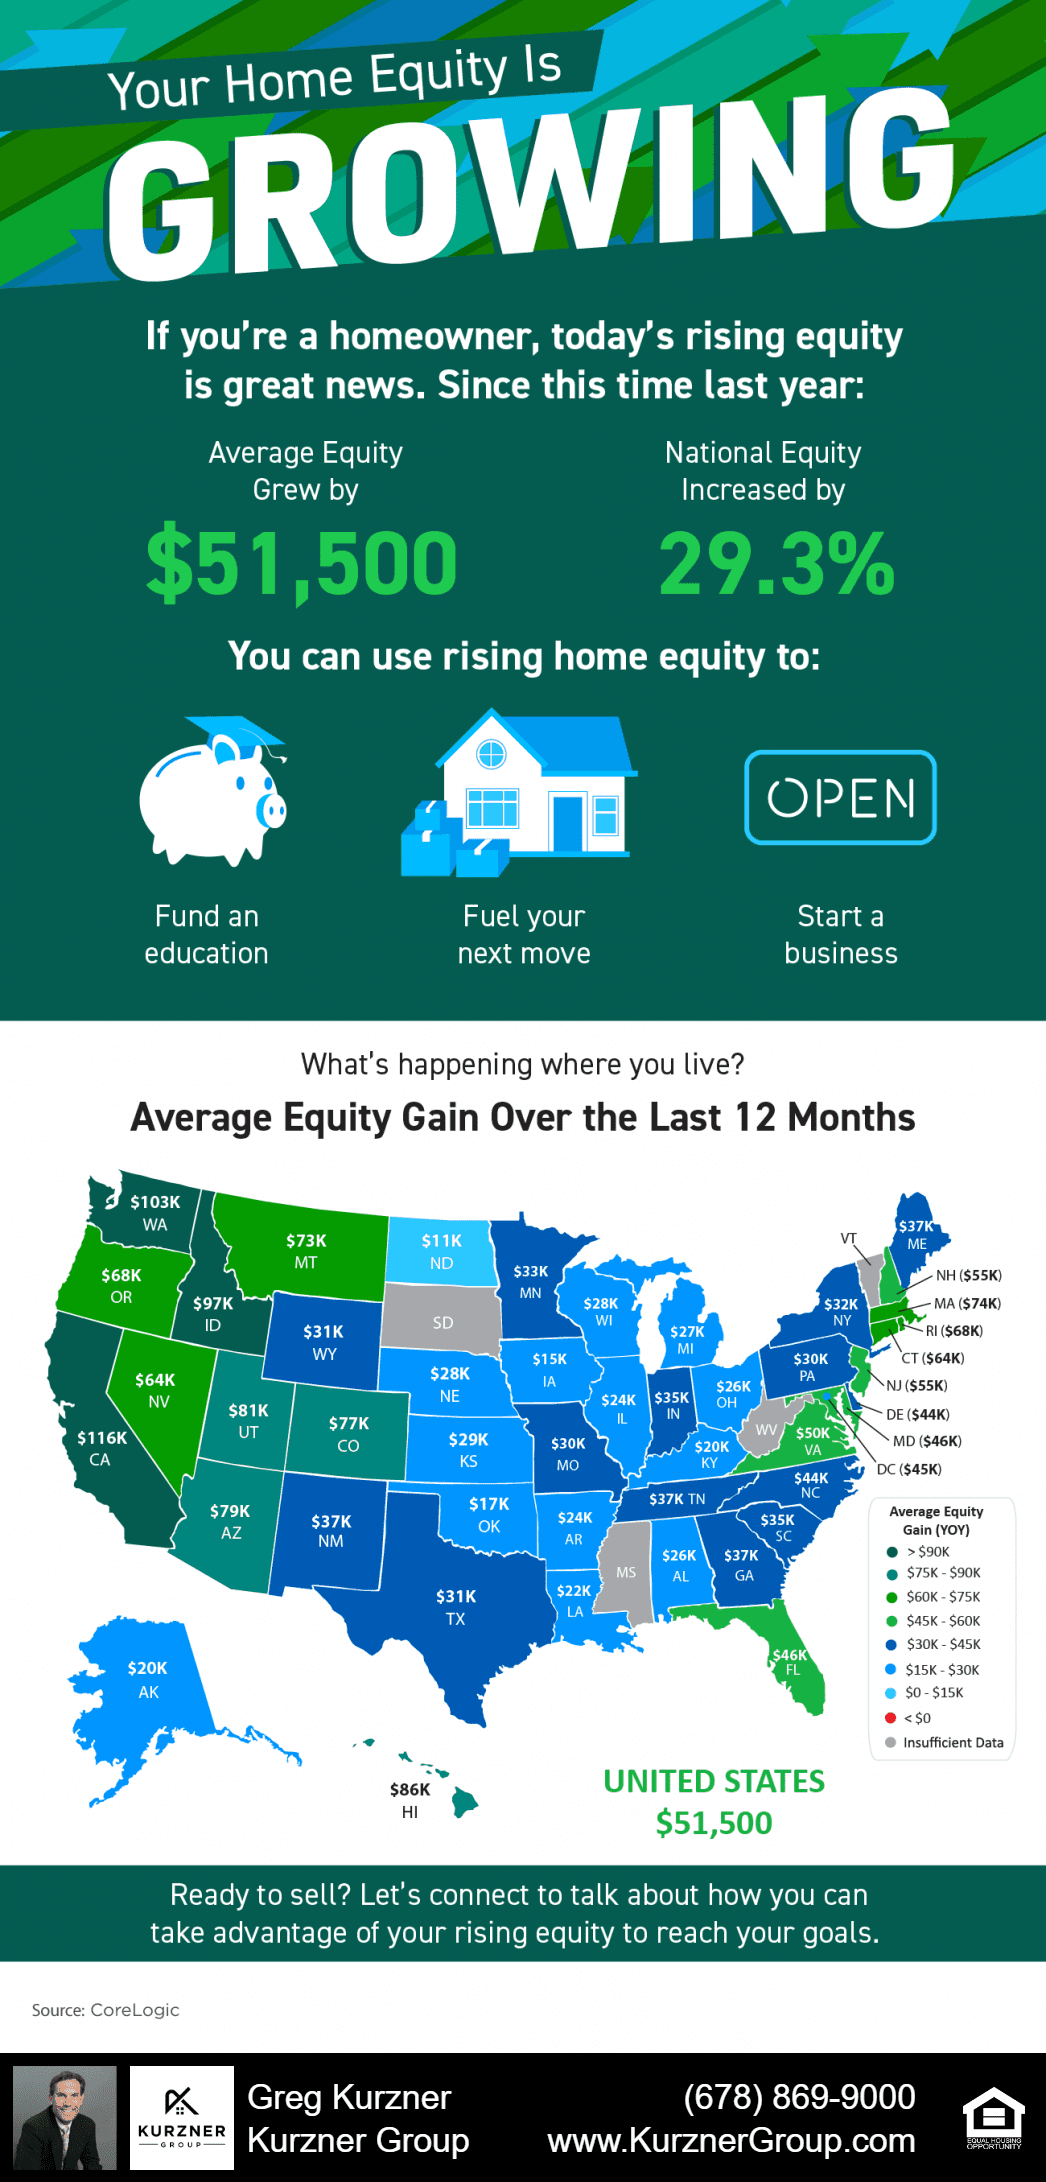 Your Home Equity Is Growing [INFOGRAPHIC]